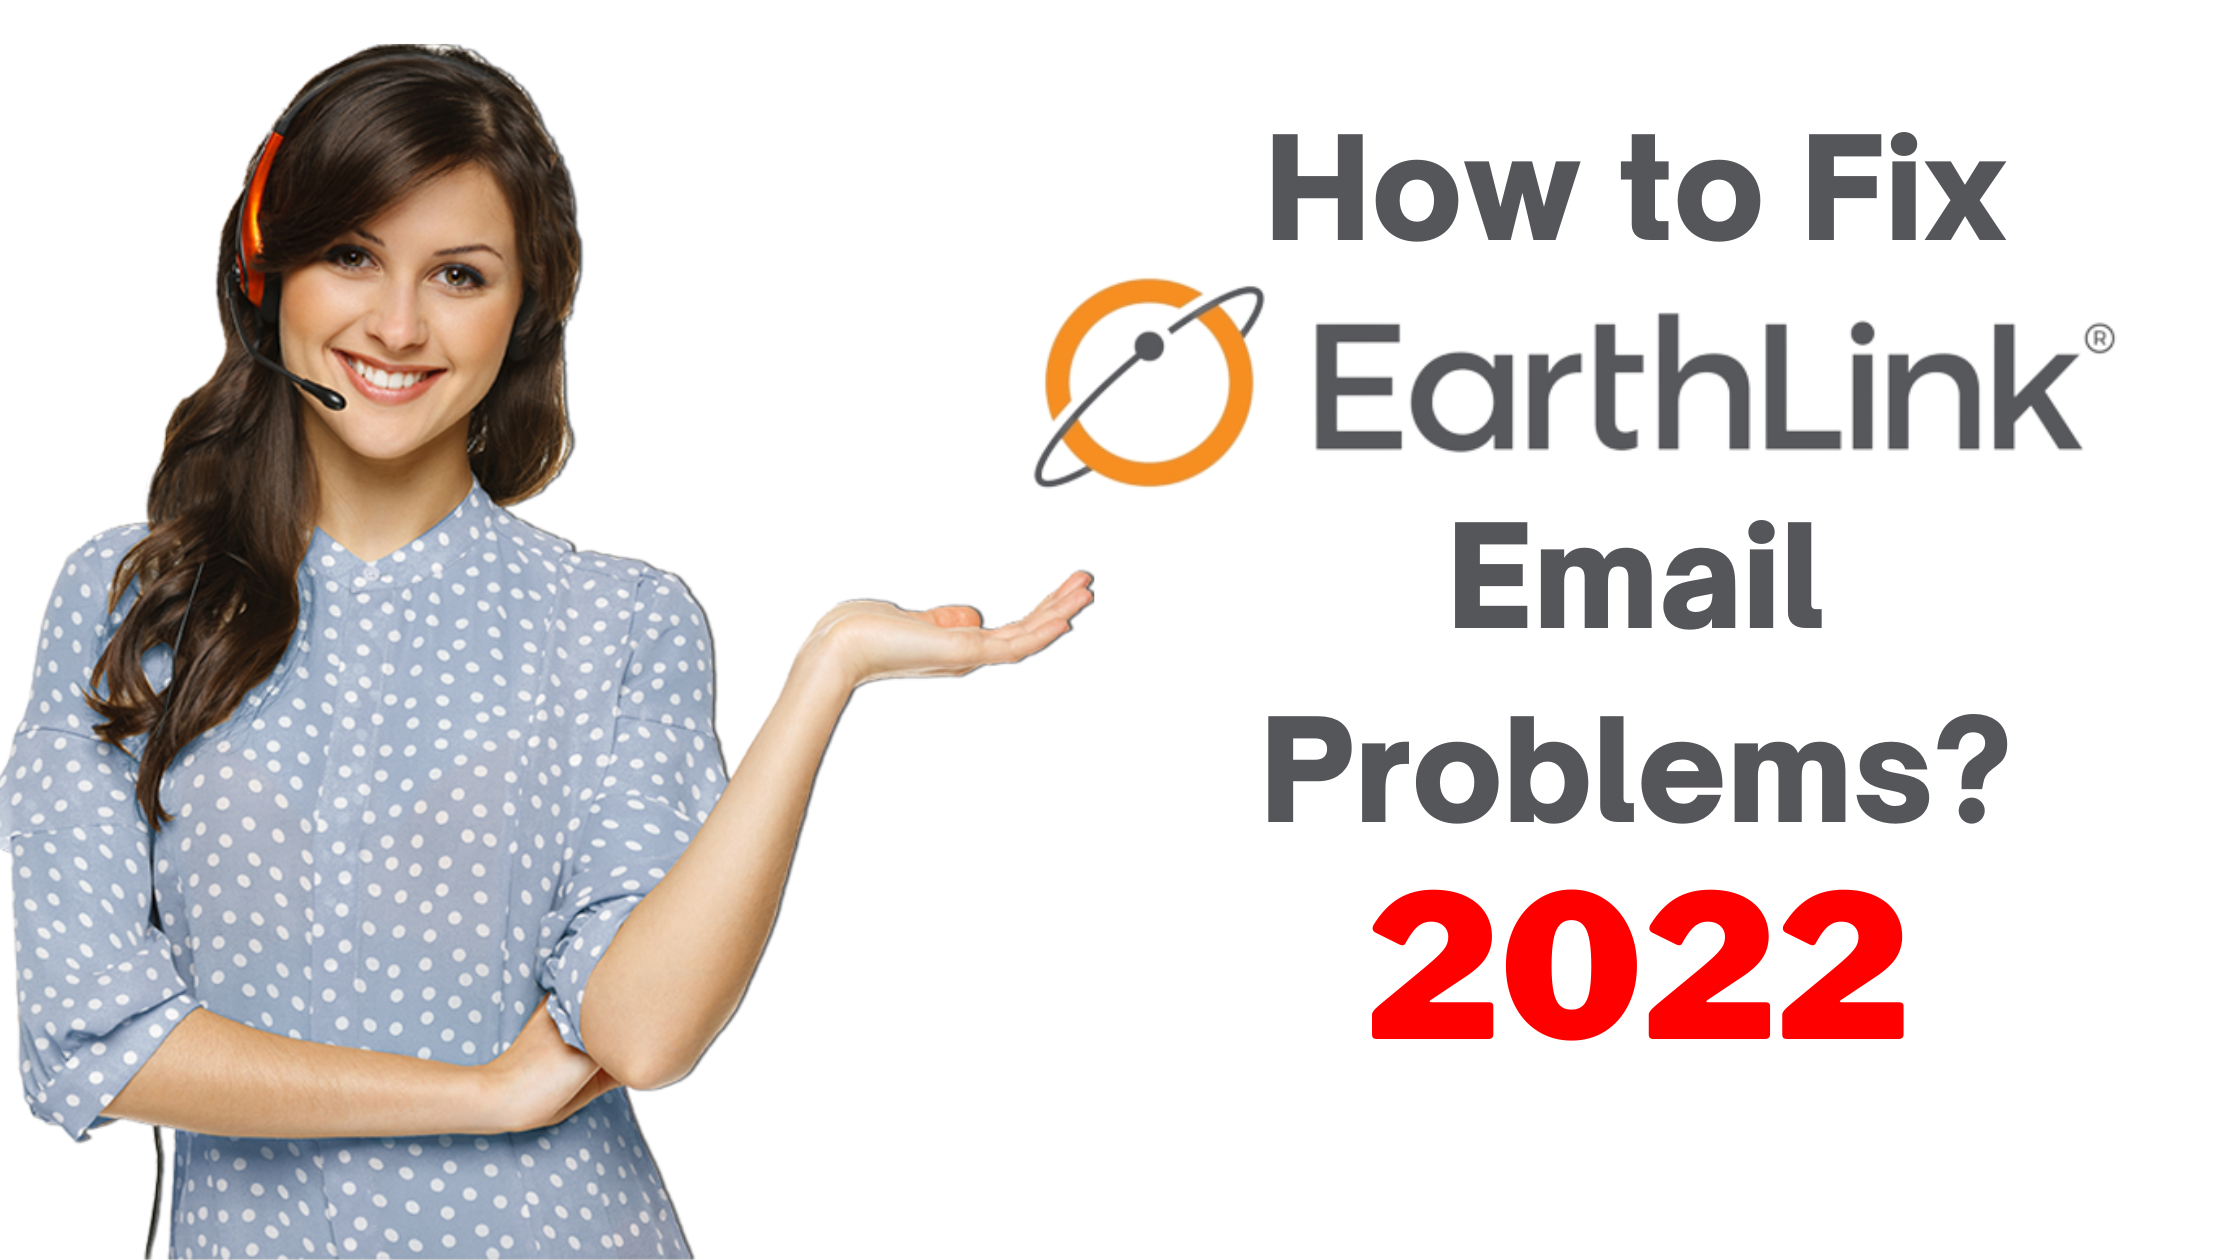 How to Fix Earthlink Email Problems?